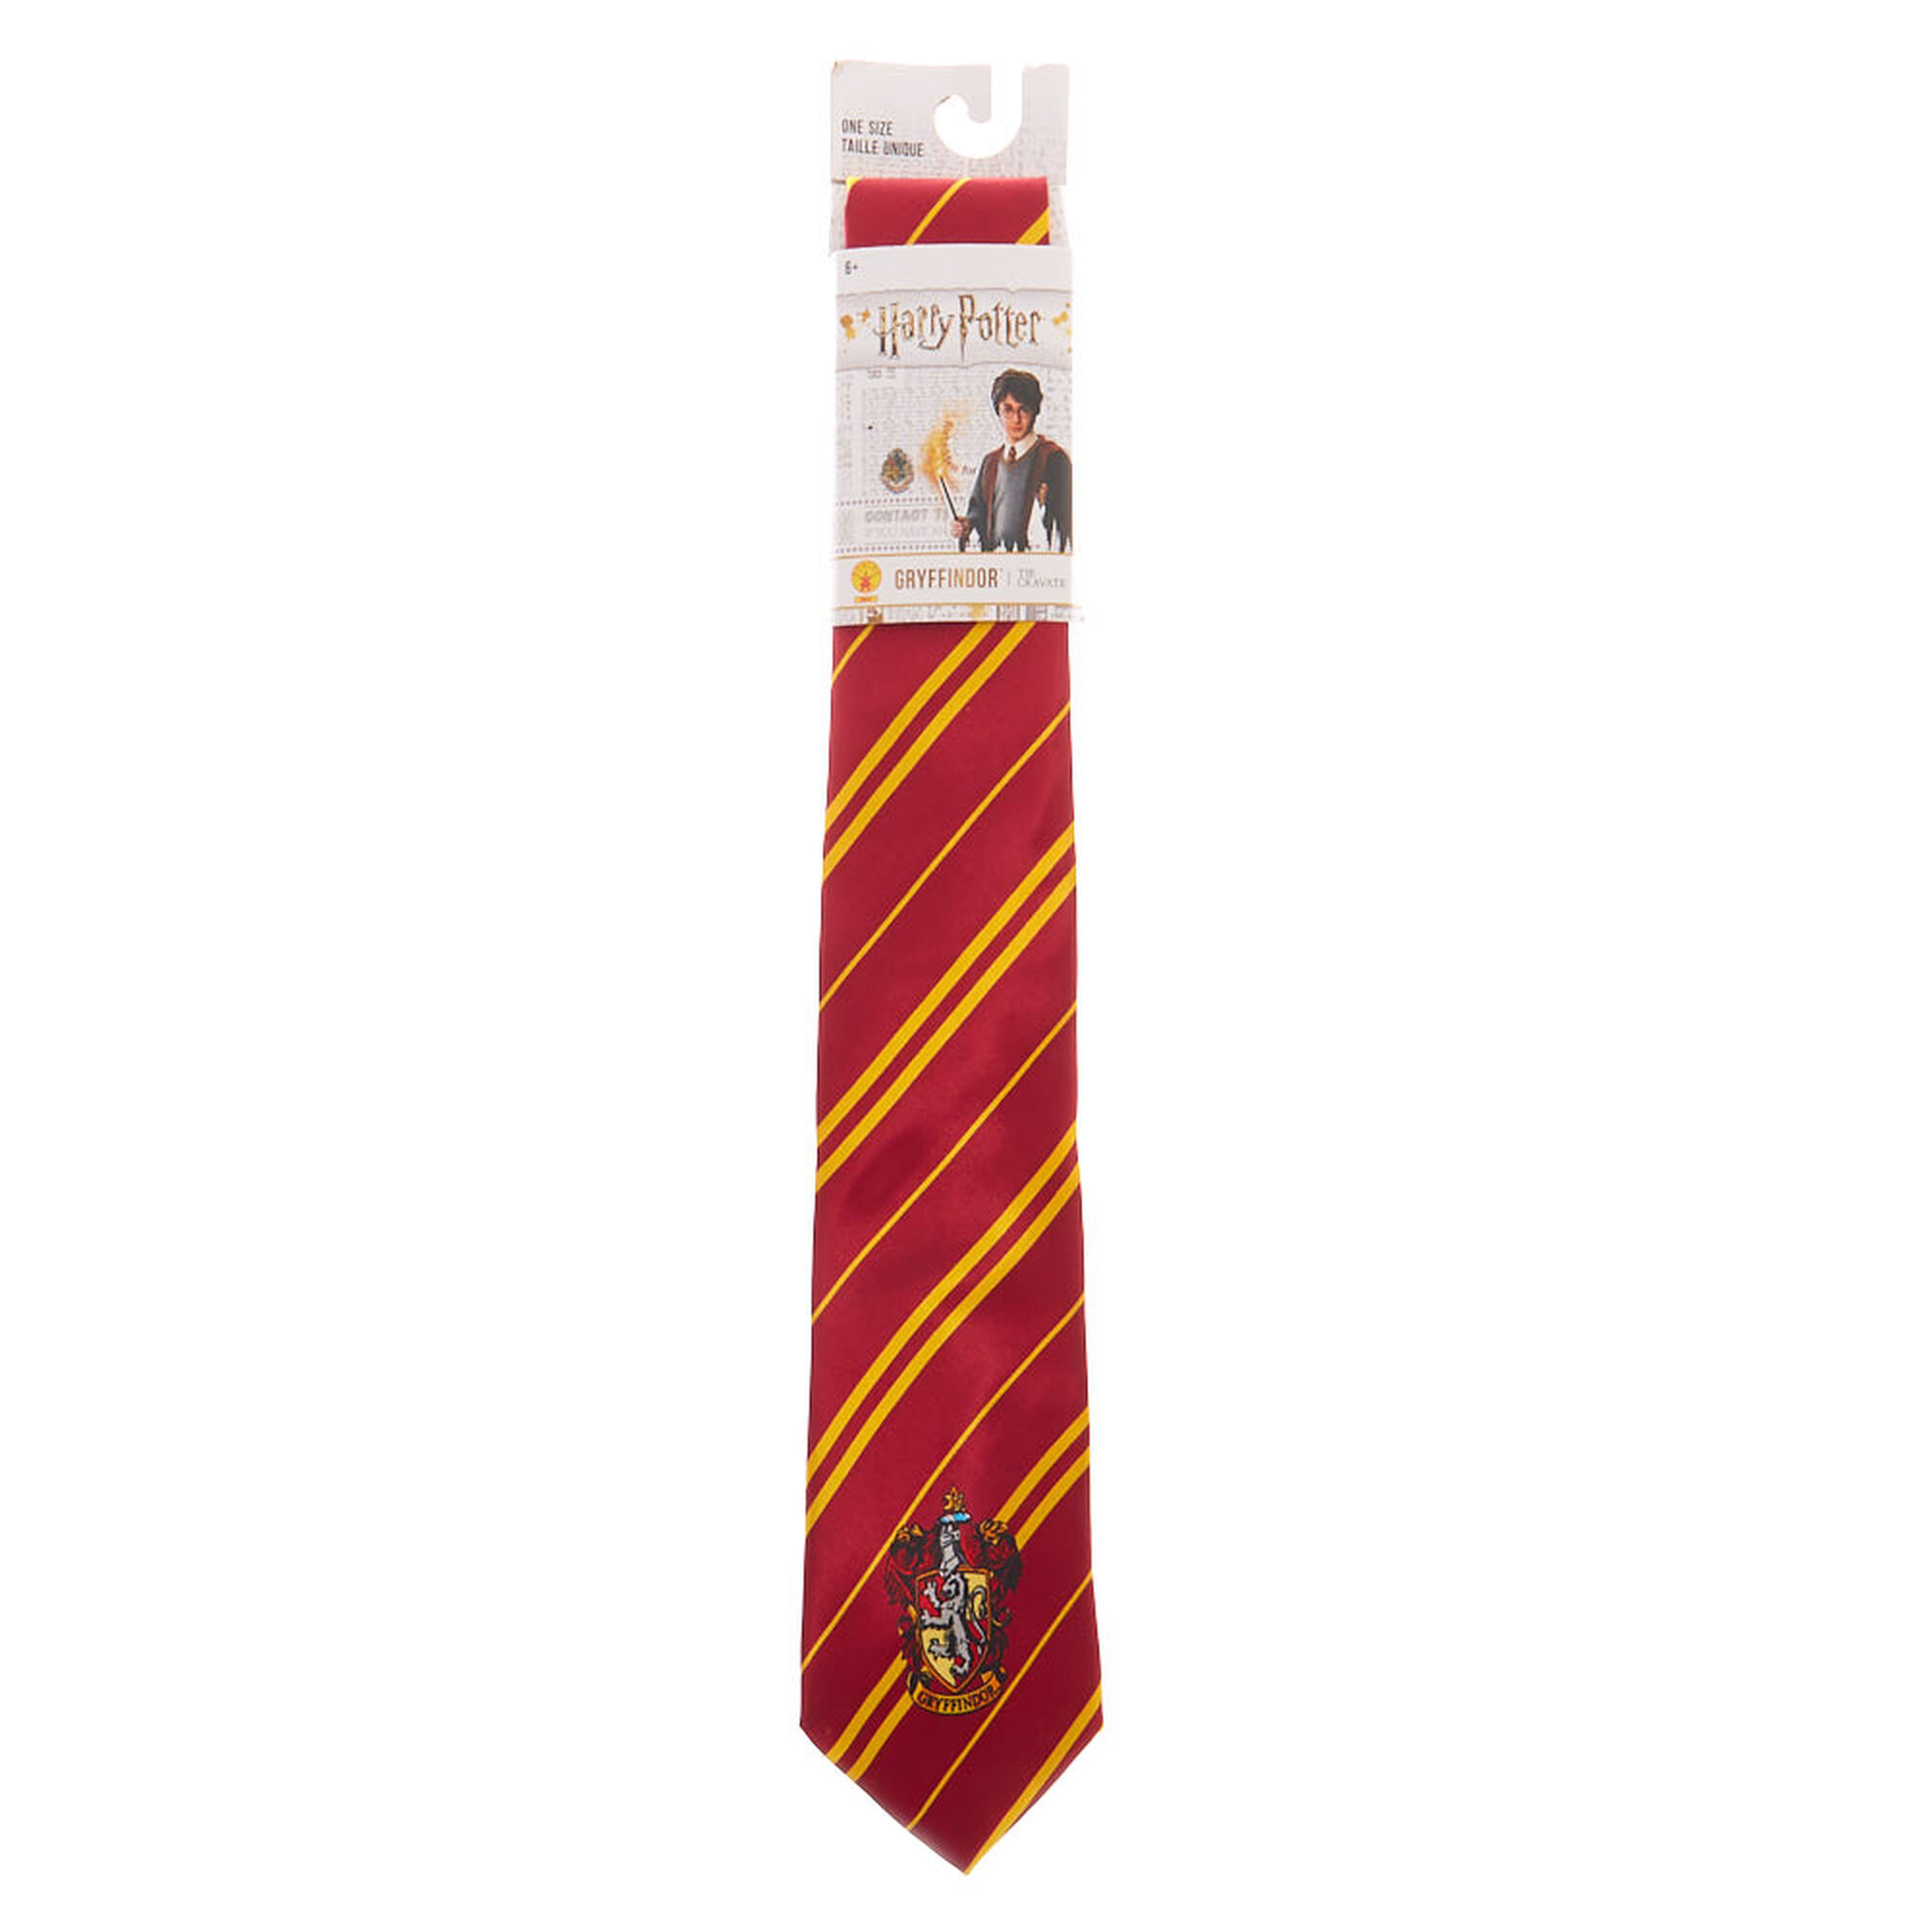 View Claires Harry Potter Gryffindor Tie Red information